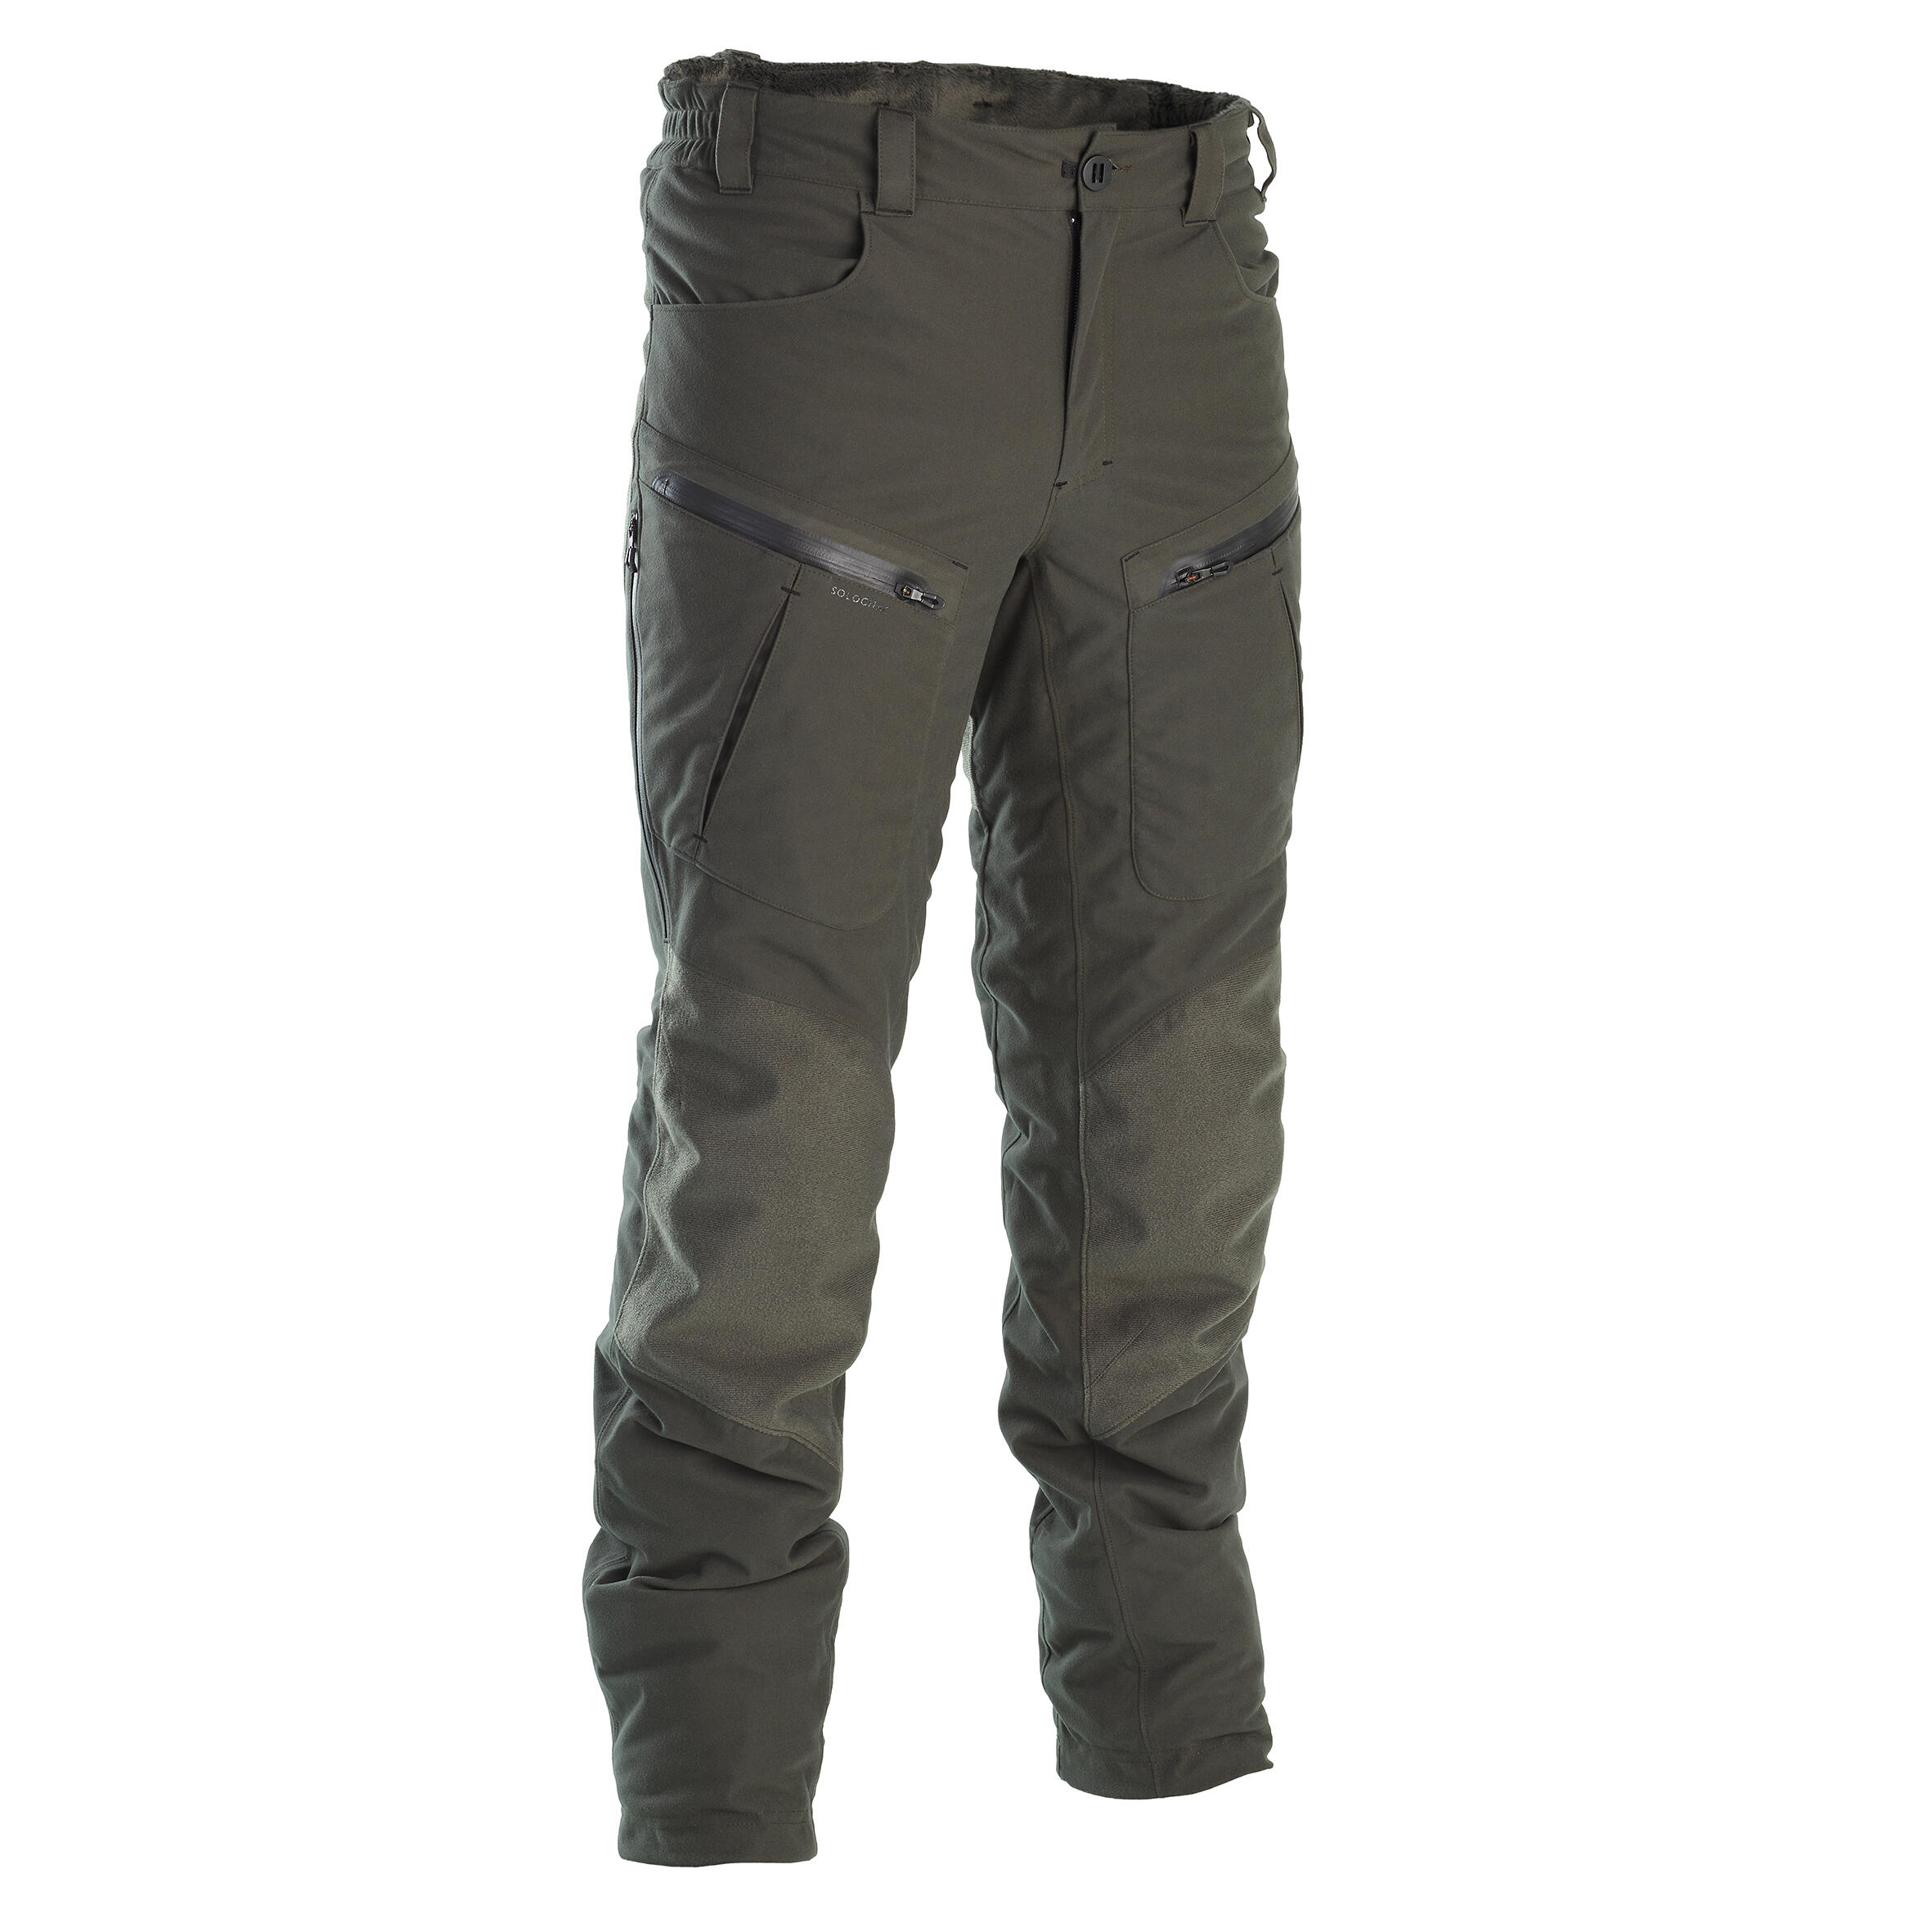 Cycling Trousers | Waterproof Trousers, MTB Trousers | Decathlon